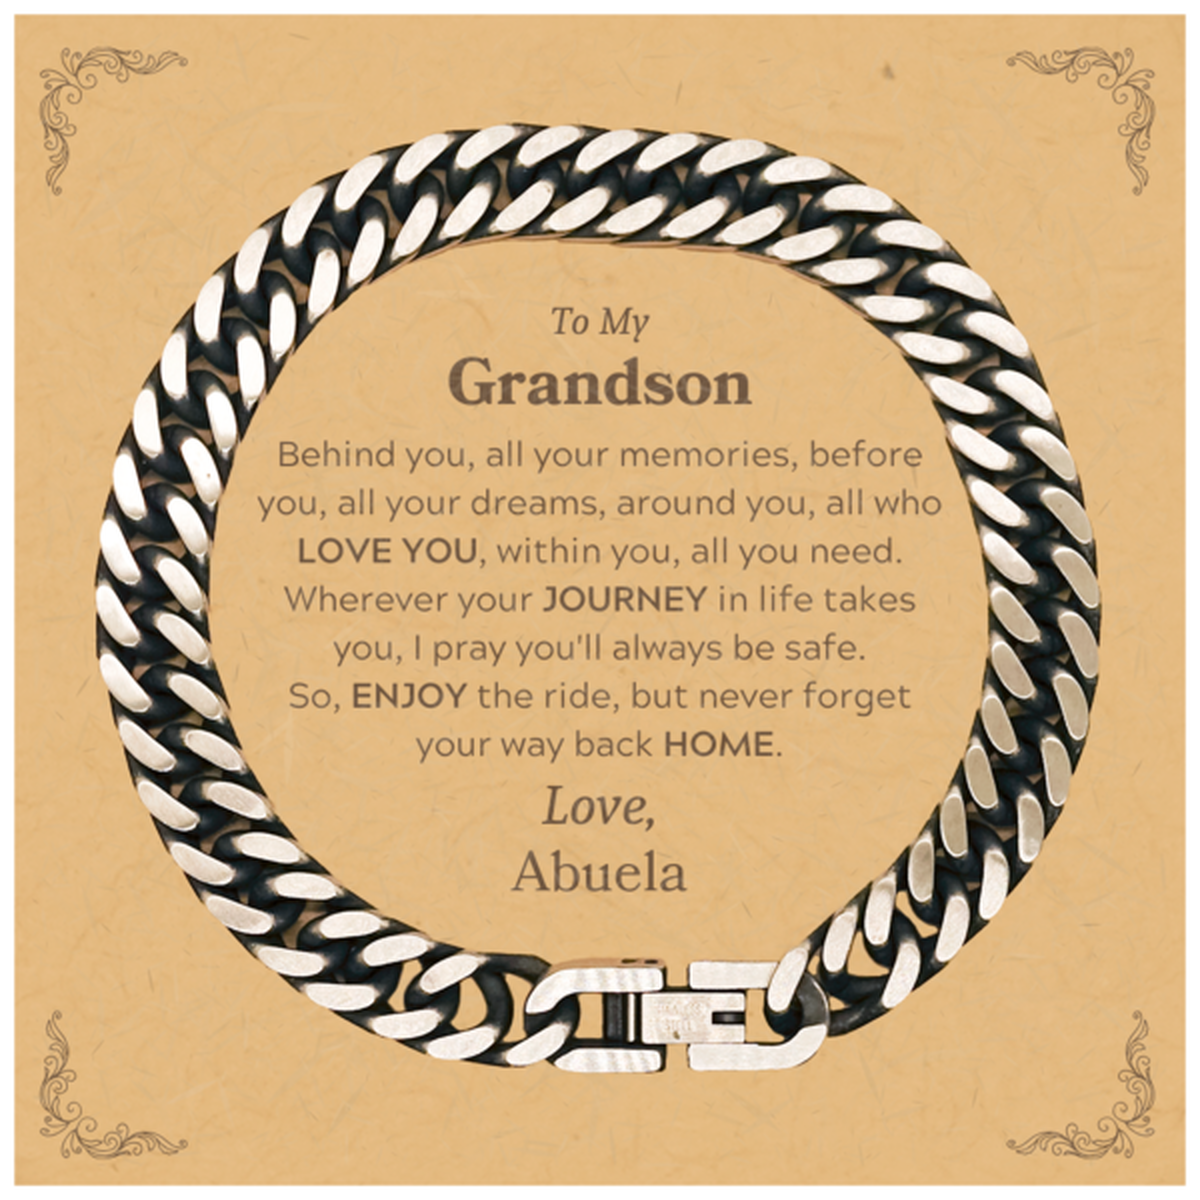 To My Grandson Graduation Gifts from Abuela, Grandson Cuban Link Chain Bracelet Christmas Birthday Gifts for Grandson Behind you, all your memories, before you, all your dreams. Love, Abuela